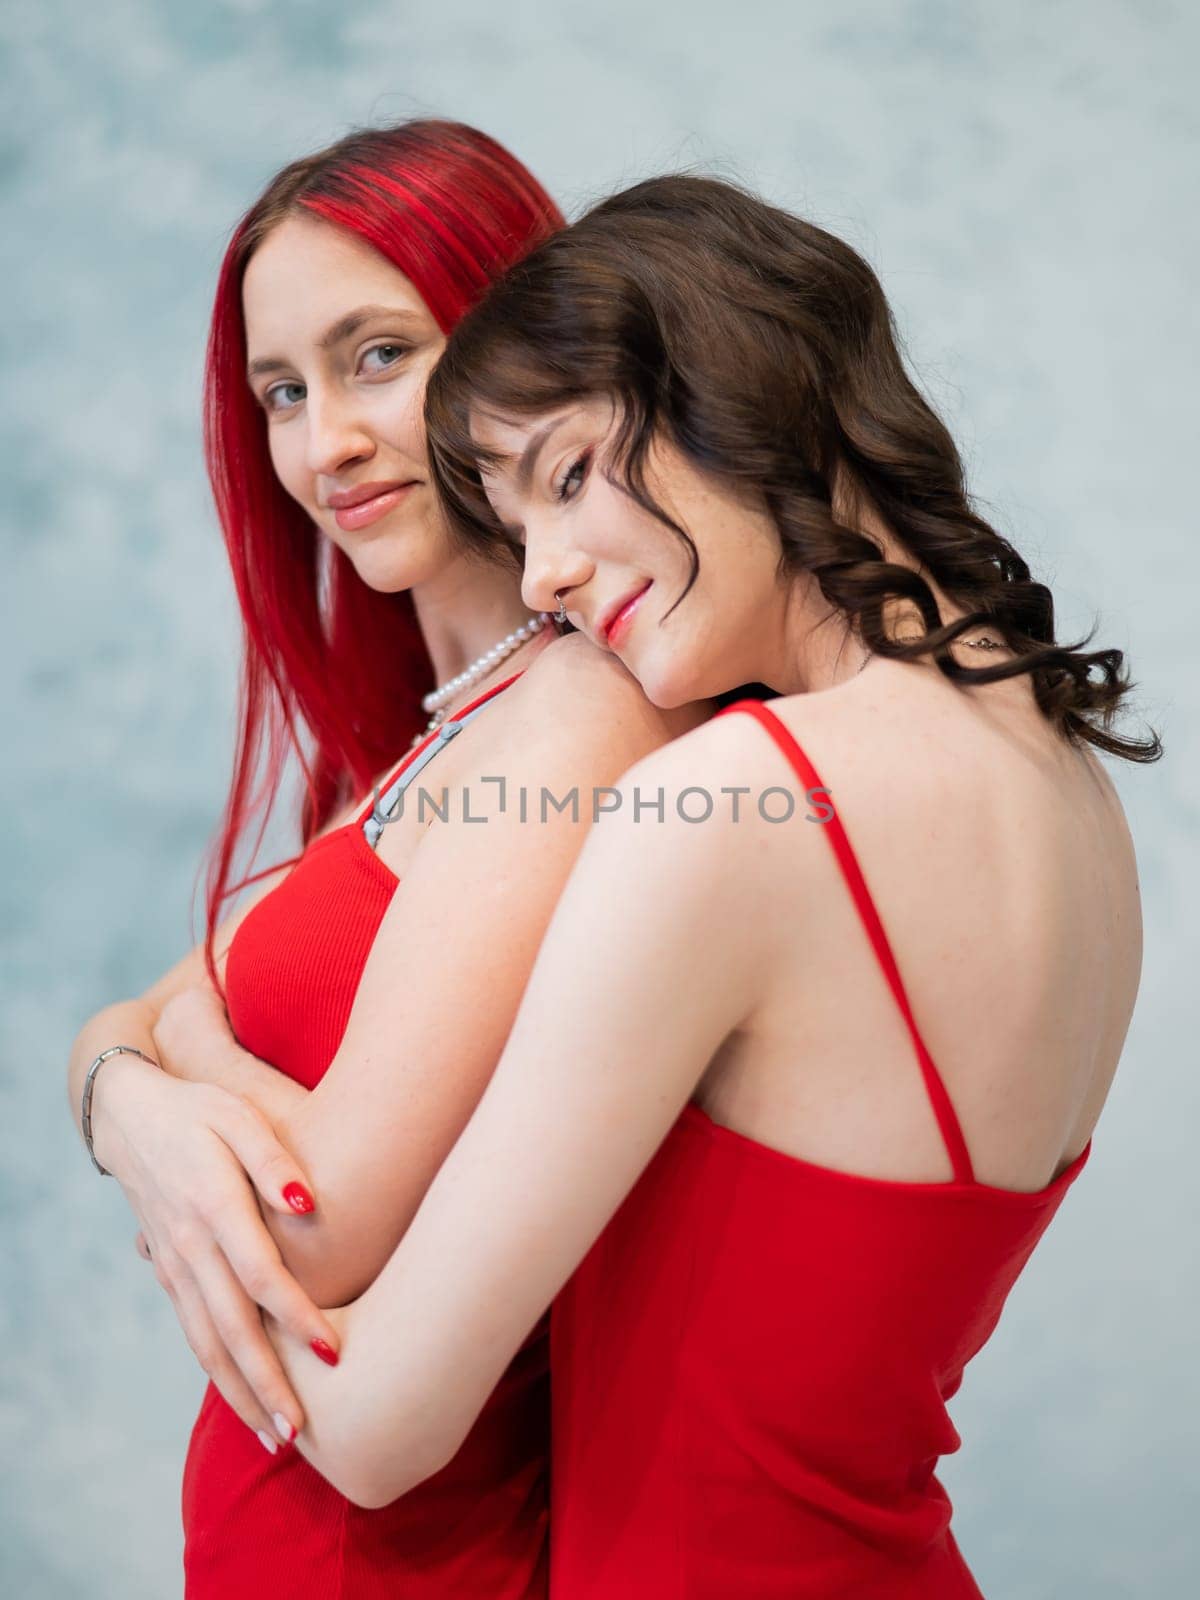 A close-up portrait of two tenderly embracing women dressed in identical red dresses. Lesbian intimacy. by mrwed54